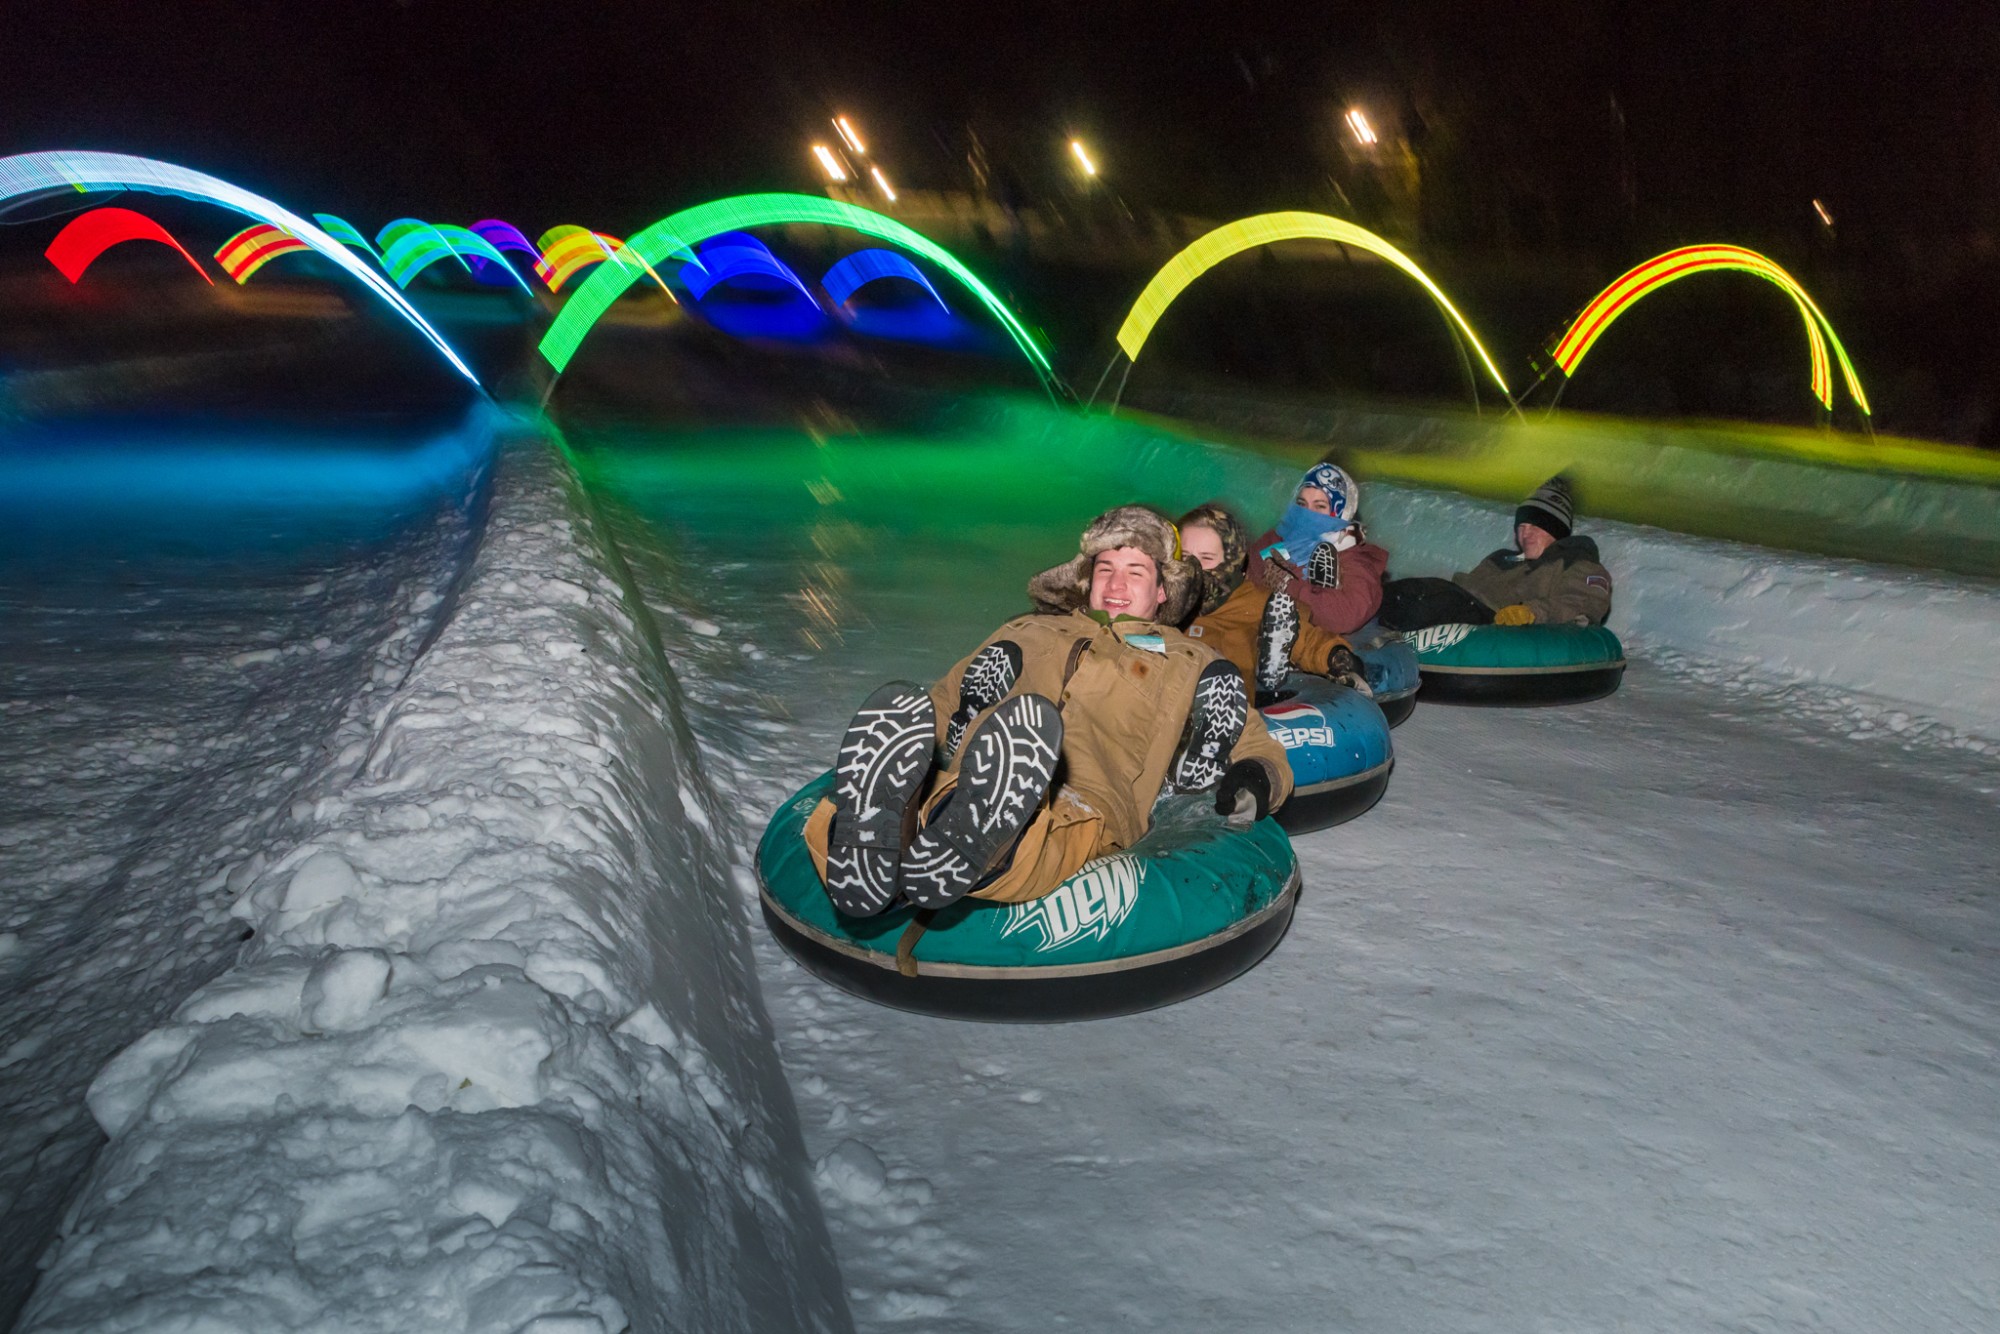 Glow Tubing Plans for 2017-18 Glow Tubing In Mansfield Ohio